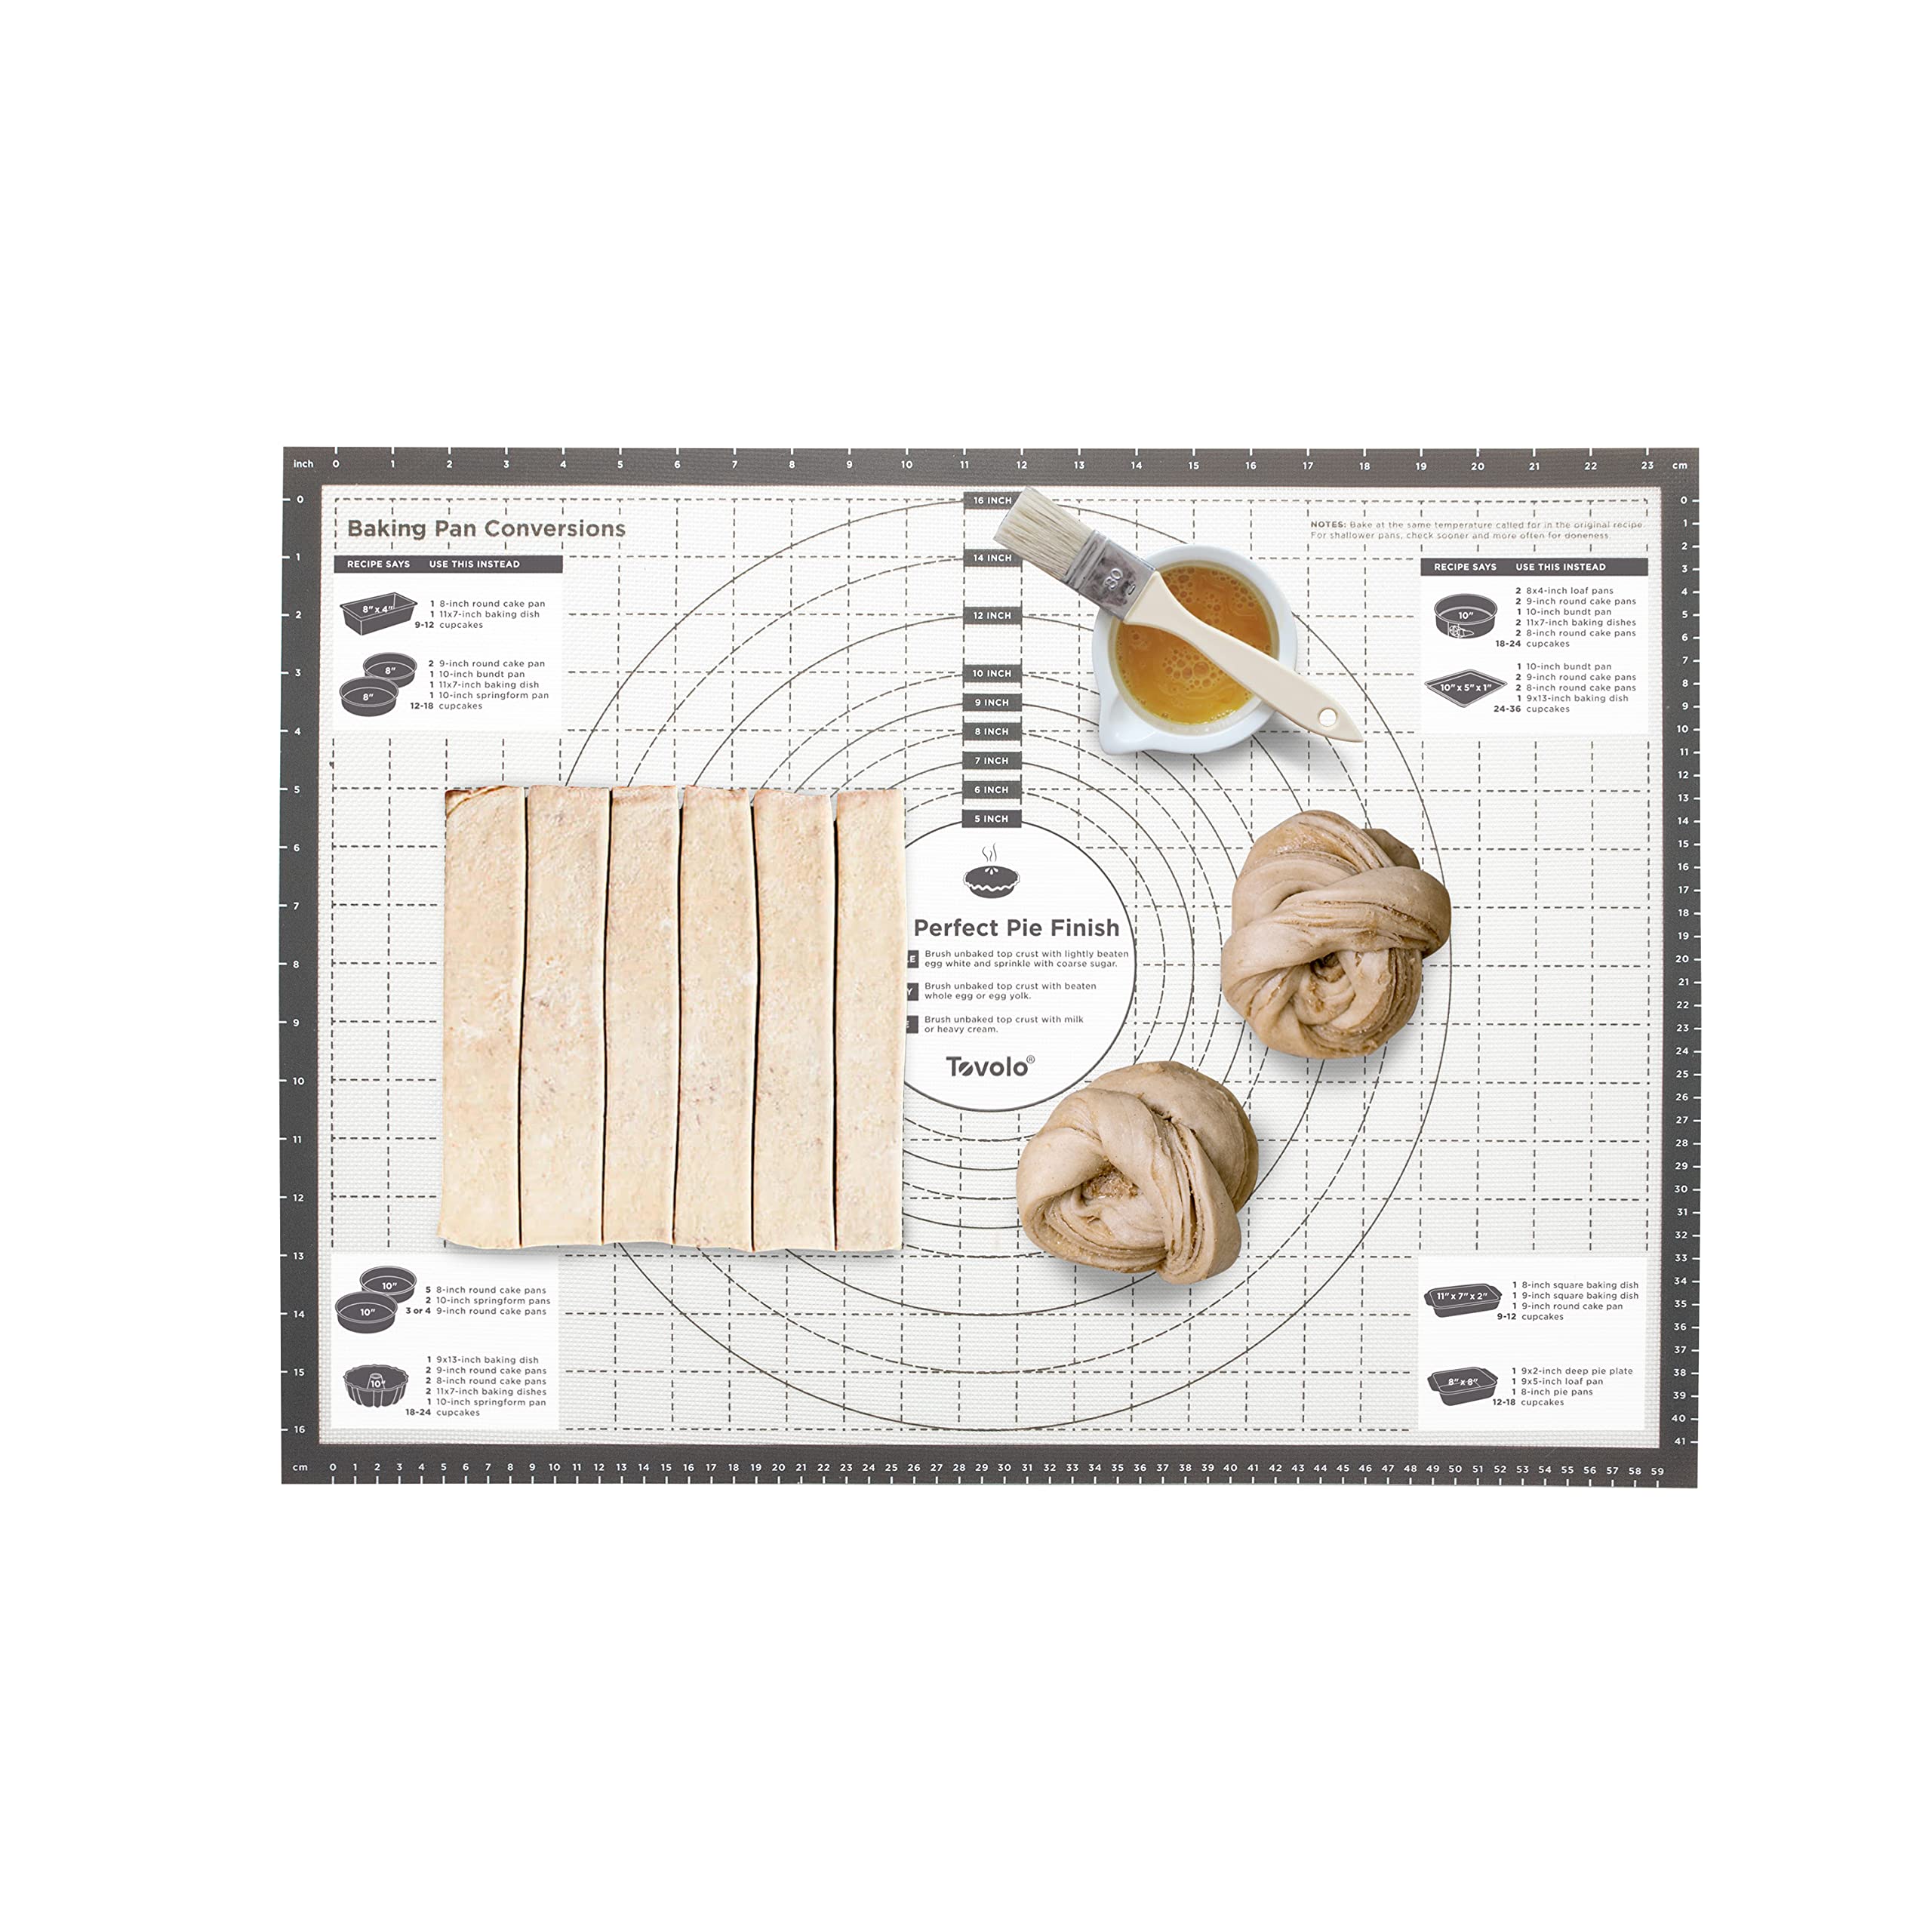 Tovolo Pro-Grade Sil Pastry Mat w/Reference Marks for Baking, Food and Meal Prep, Cooking and More